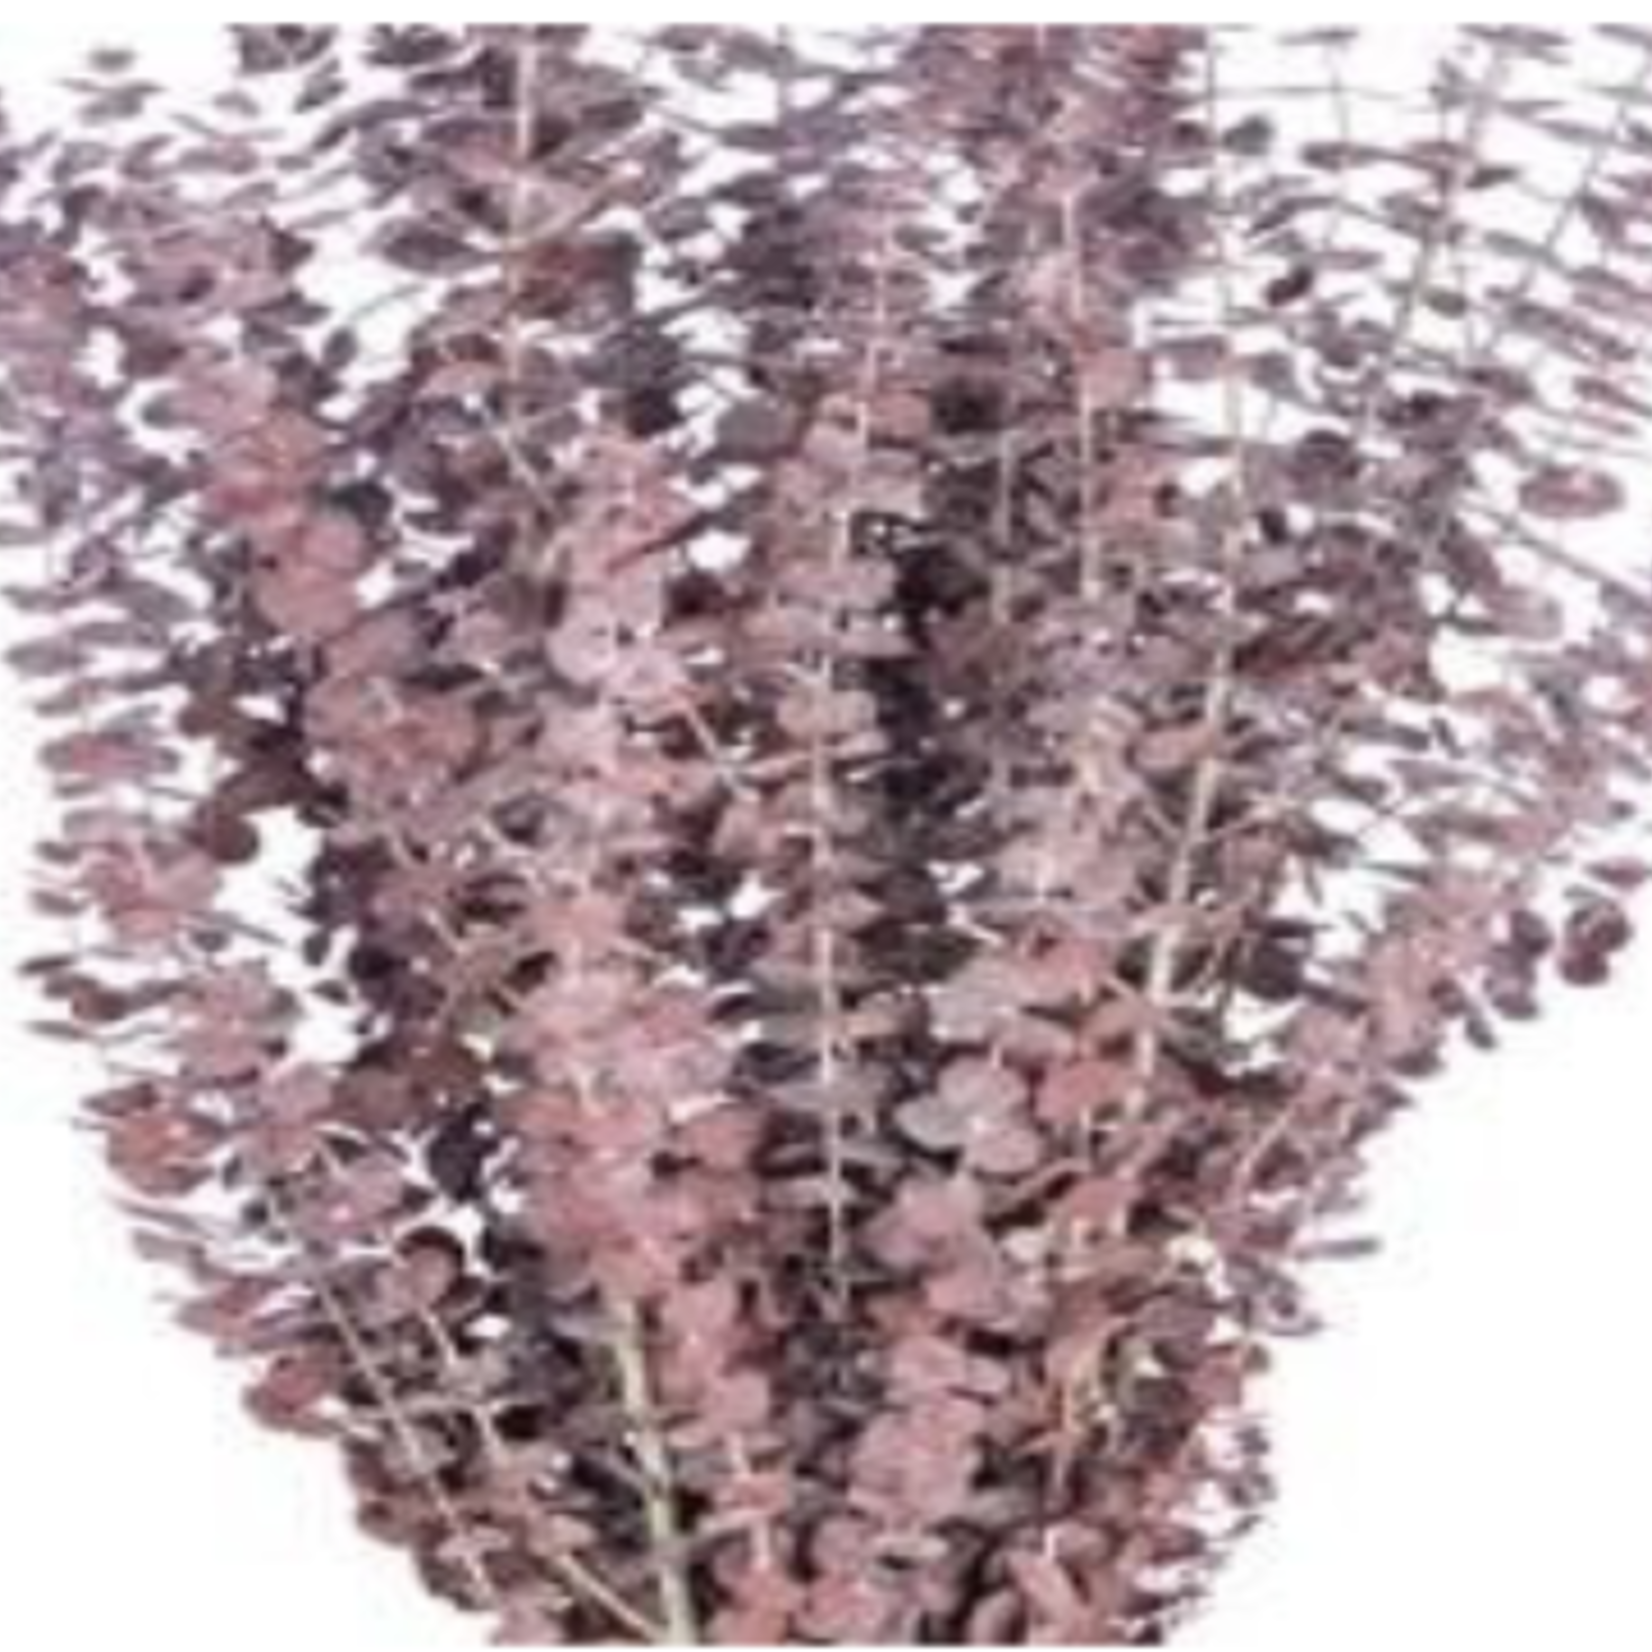 RED PRESERVED FROSTED EUCALYPTUS 1lbs (approximately 30” and 25 stems”, reg $24.99